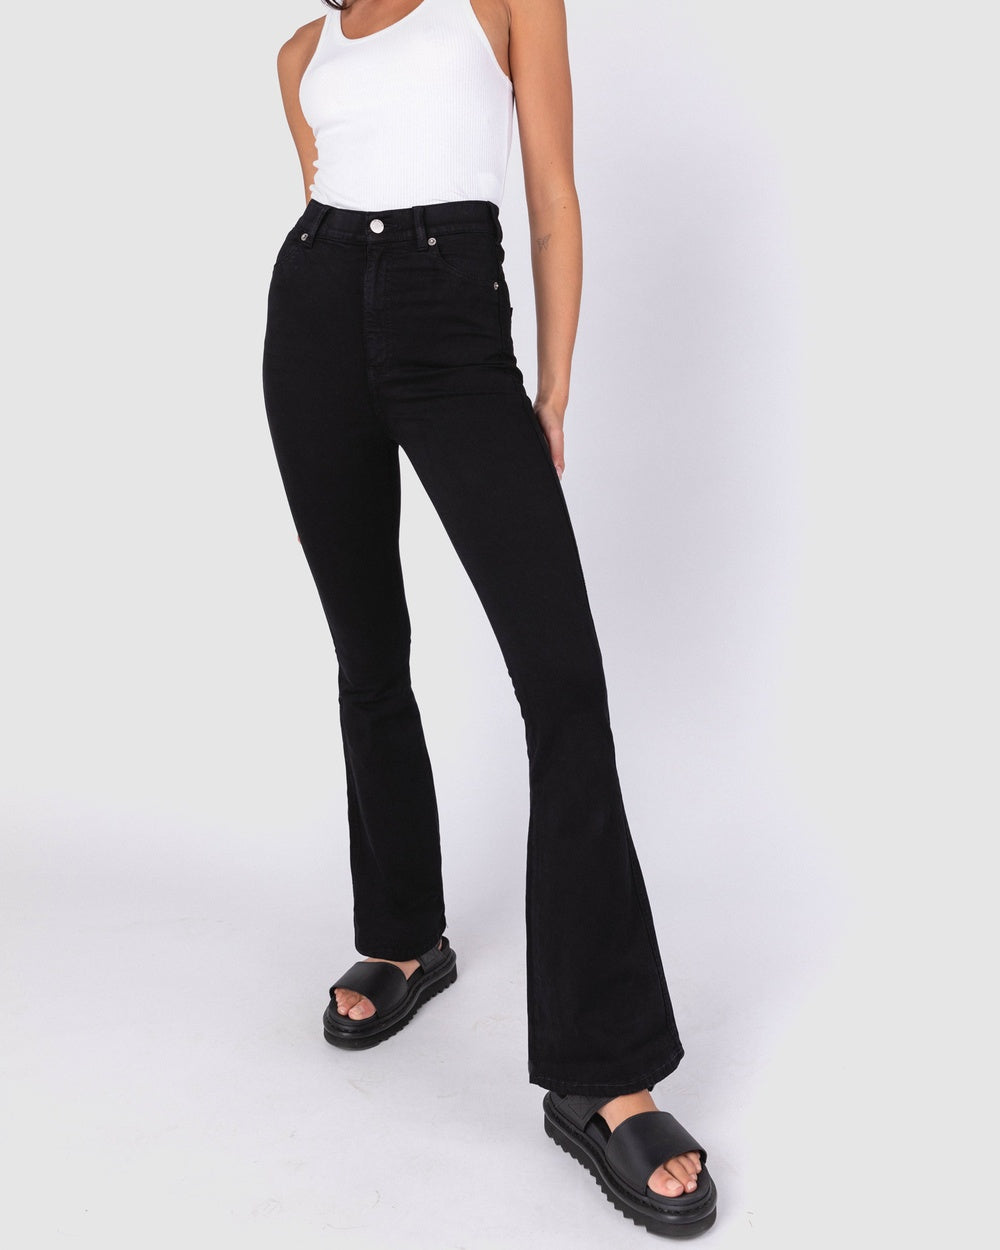 High waisted Flare Jeans to elongate your legs